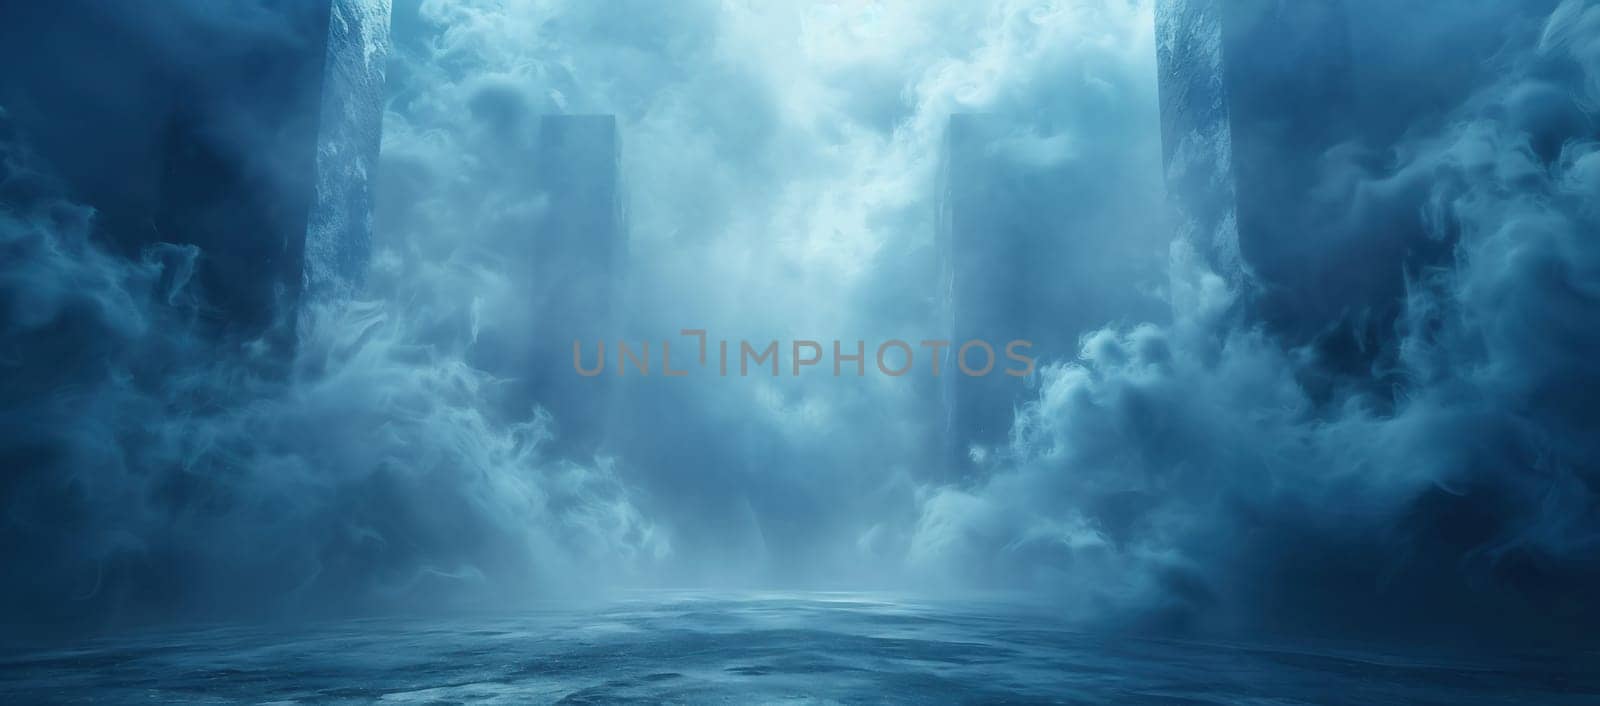 Epic sea background, storm in the sea. Digital illustration, digital painting. High quality photo